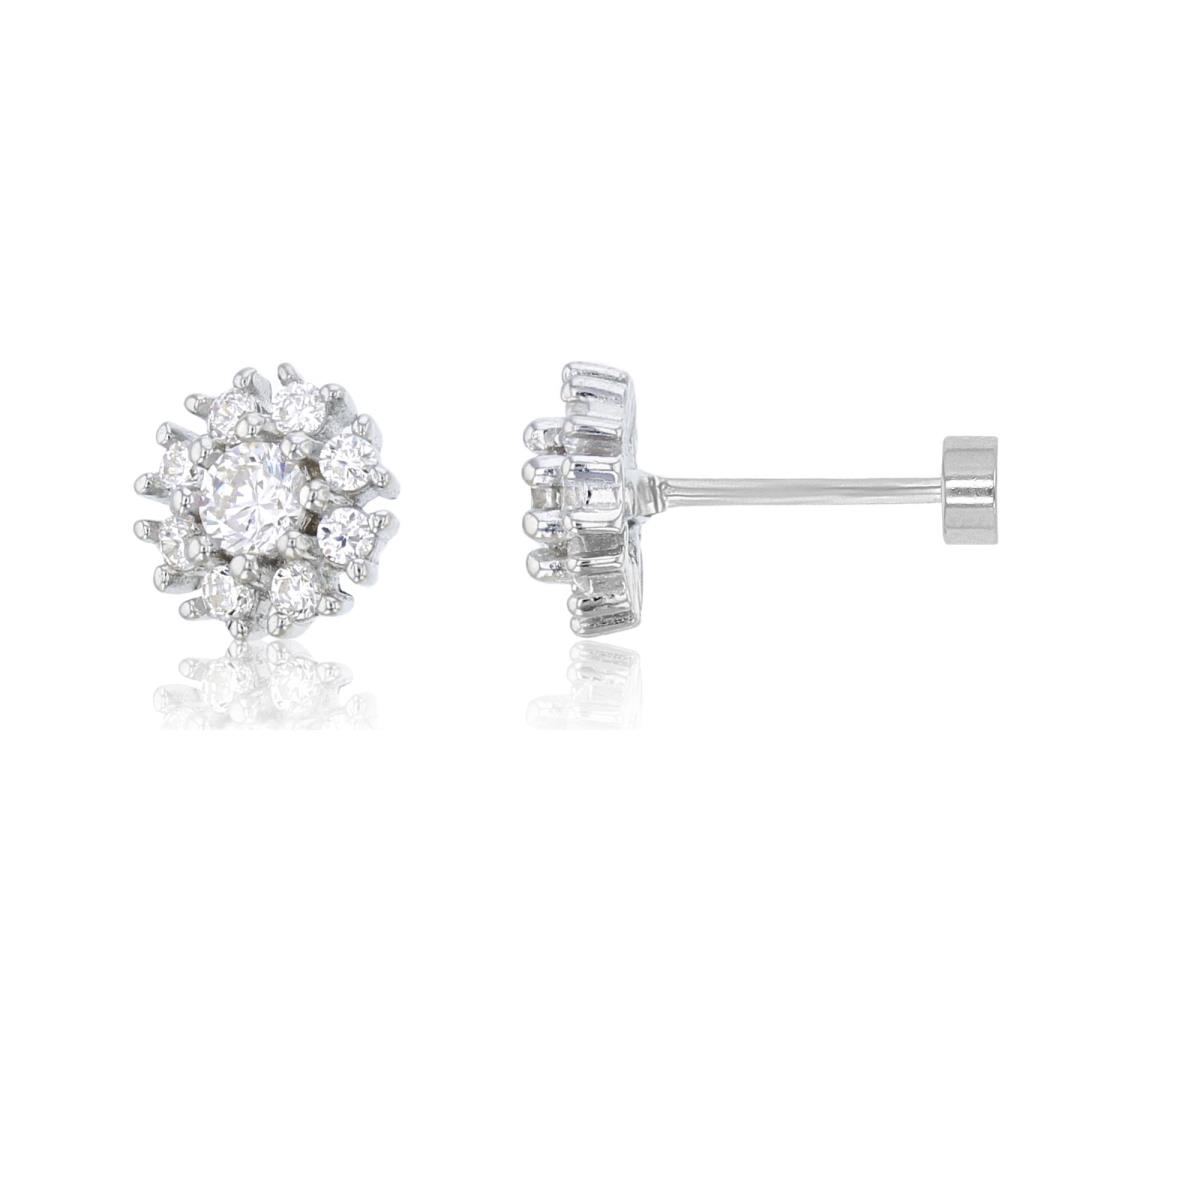 Sterling Silver Rhodium 3mm Round Pave 7mm Flat Back Stud Earrings